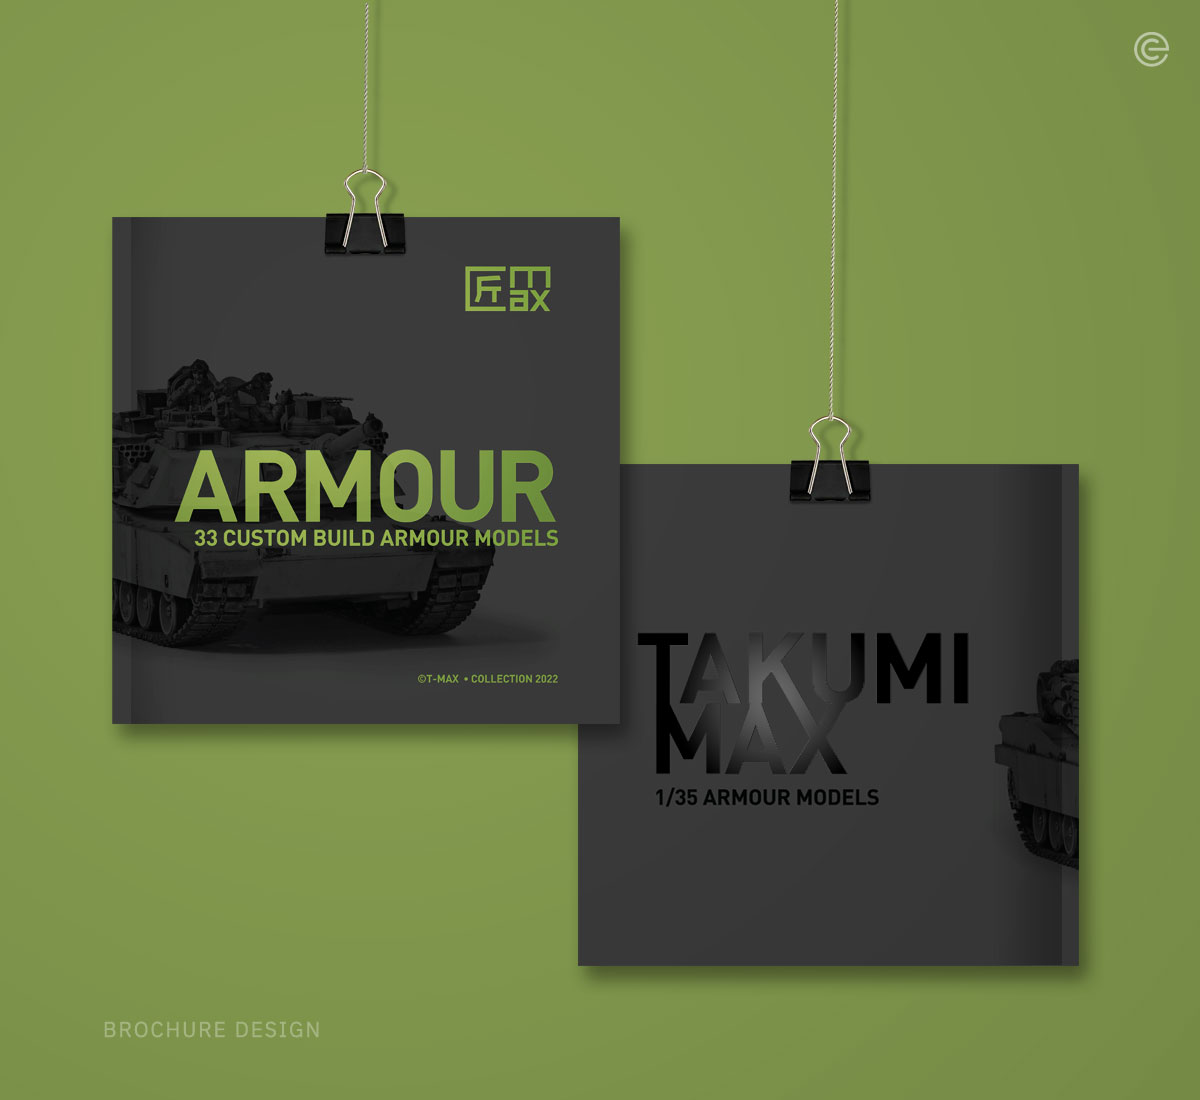 Corporate Identity Design, Ease Communications